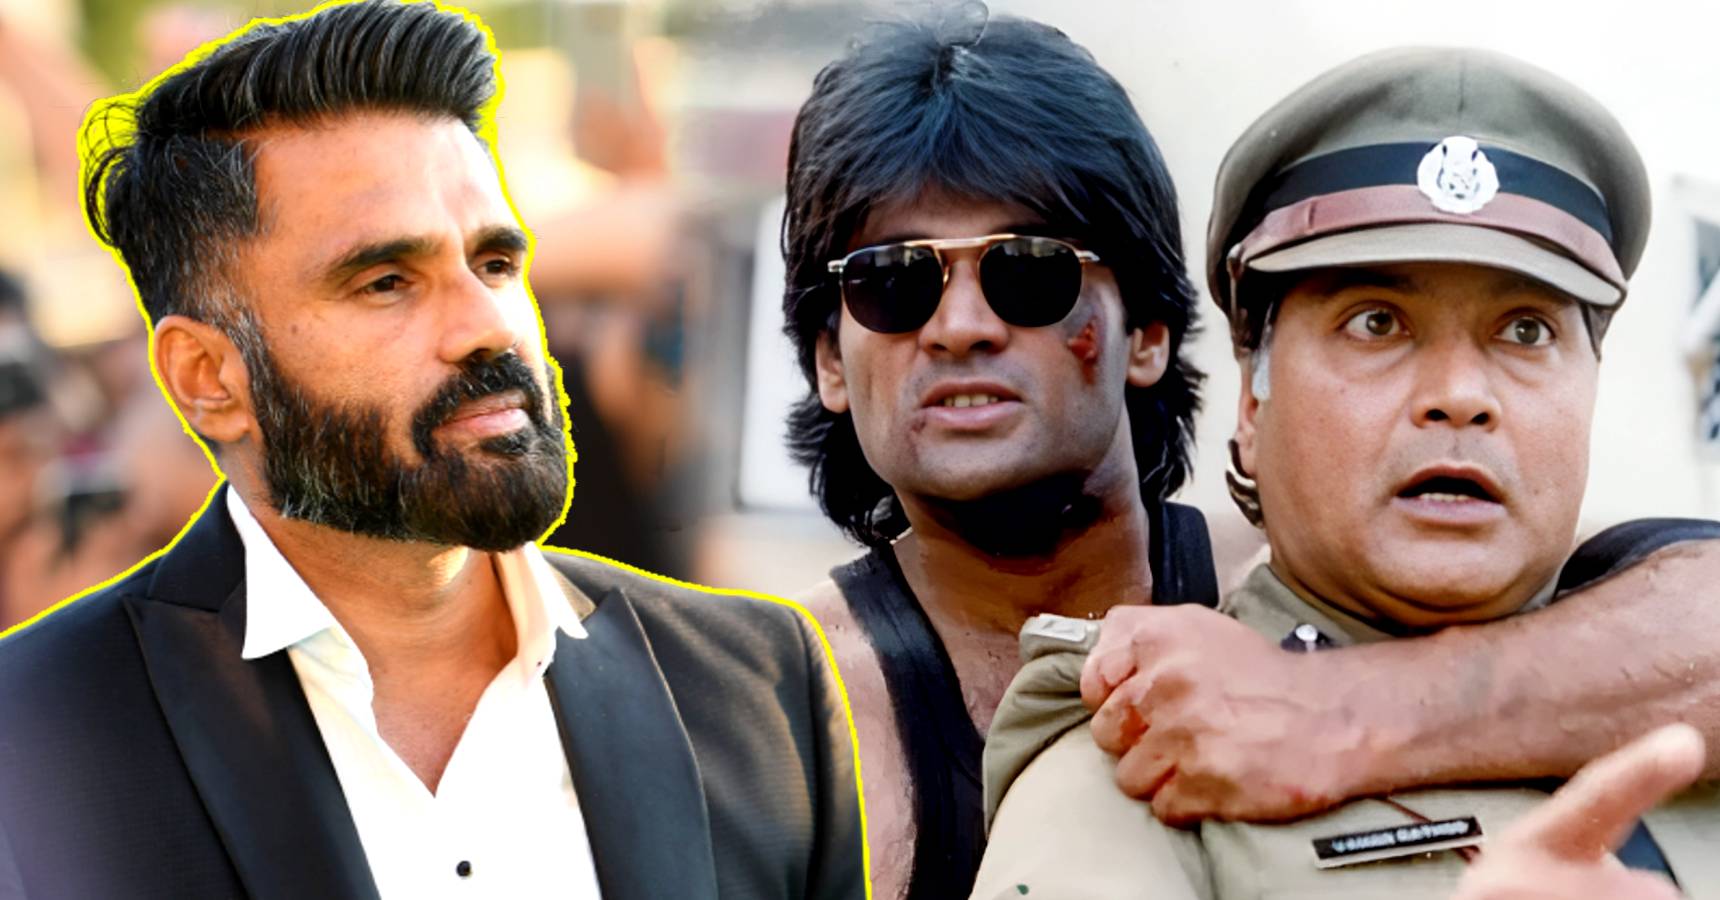 Bollywood actor Suniel Shetty unknown life story and struggle